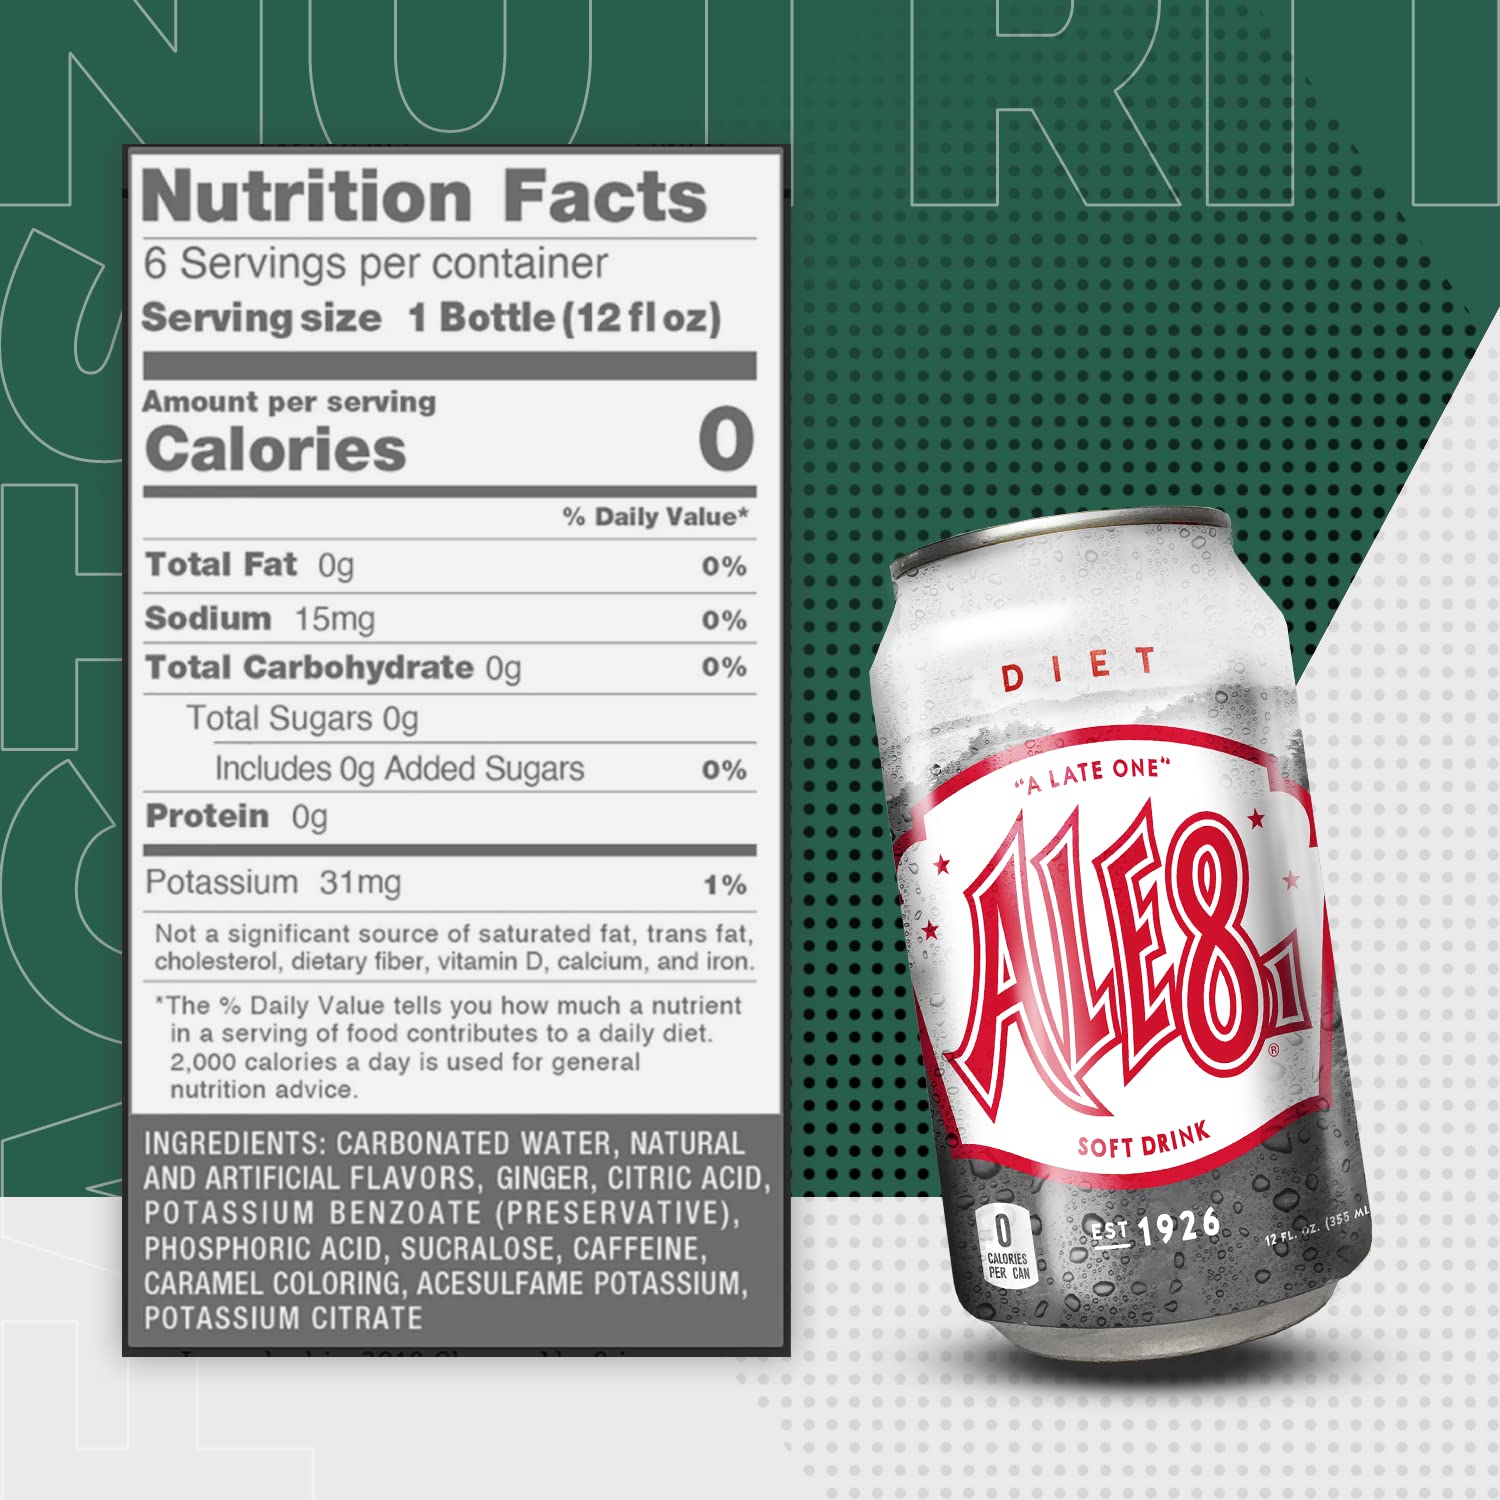 Ale 8 One Ginger Ale Soda with a Caffeine Kick & Hint of Citrus - Original Flavor - Zero Sugar - 12 Pack, Case of 12 Oz Cans - Sugar Free Ginger Soft Drink, Pack of 12 - image 5 of 6